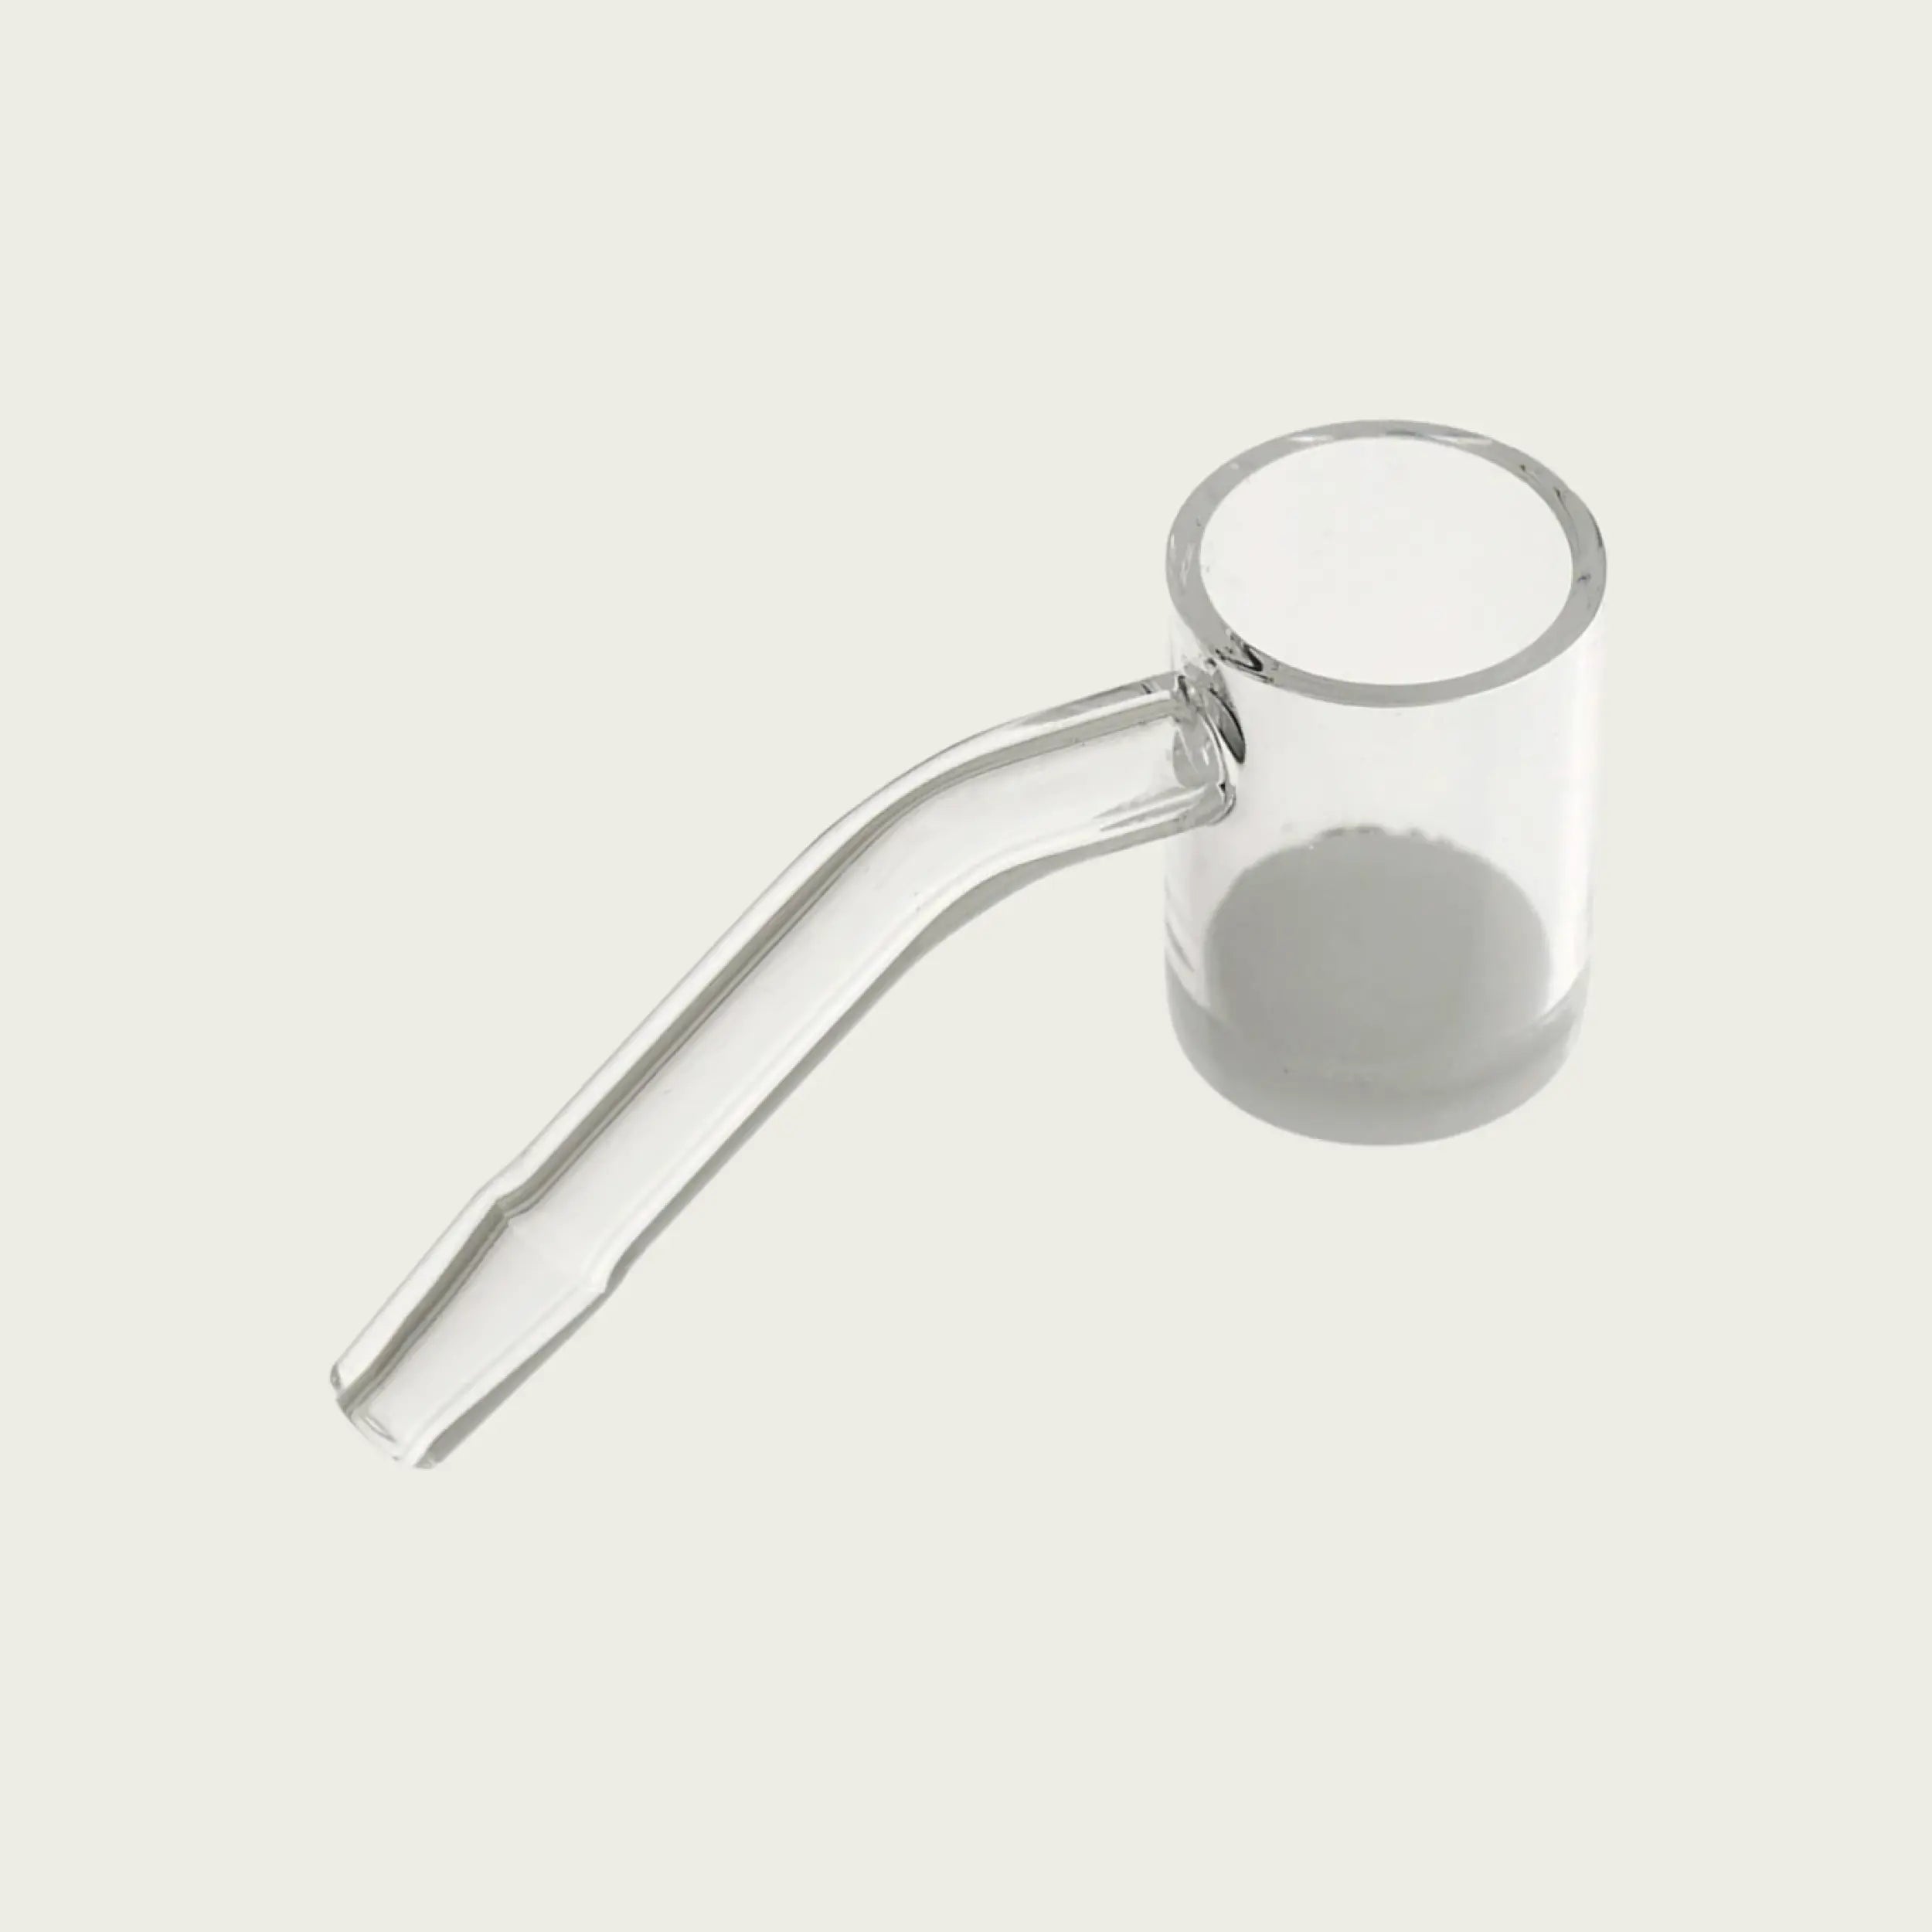 45-degree 10mm quartz banger – durable and high-quality nail for optimal dabbing experience